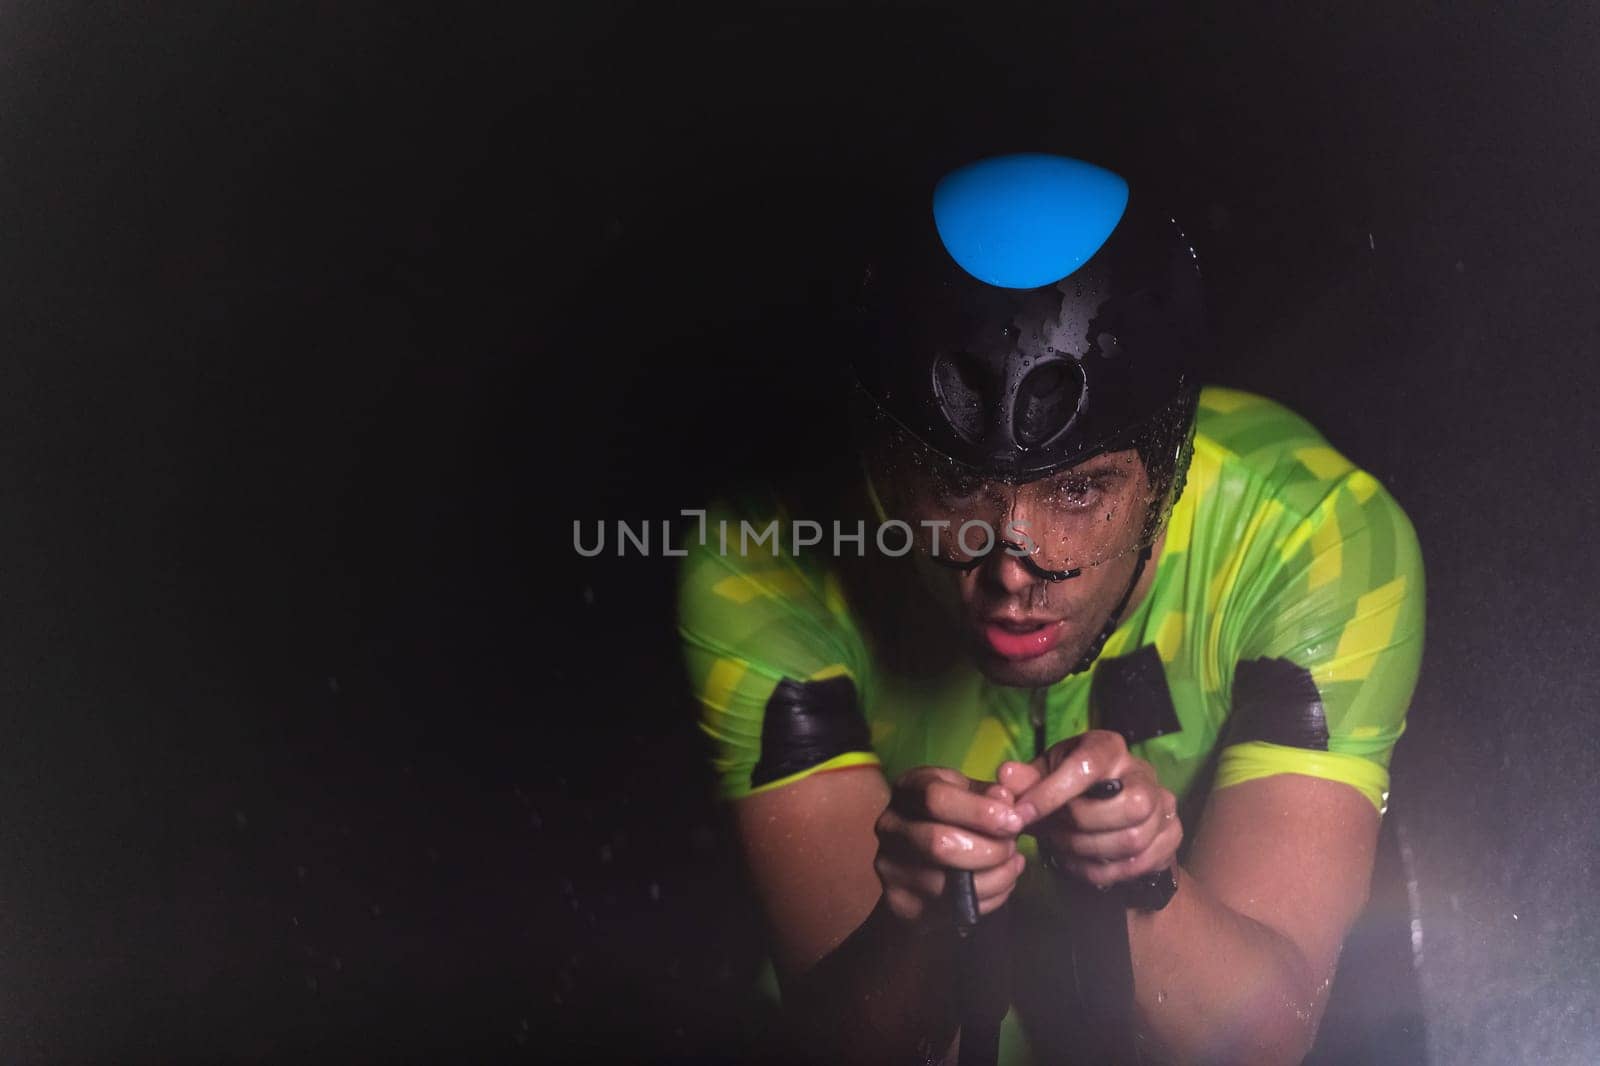 A triathlete braving the rain as he cycles through the night, preparing himself for the upcoming marathon. The blurred raindrops in the foreground and the dark, moody atmosphere in the background add to the sense of determination and grit shown by the athlete. by dotshock